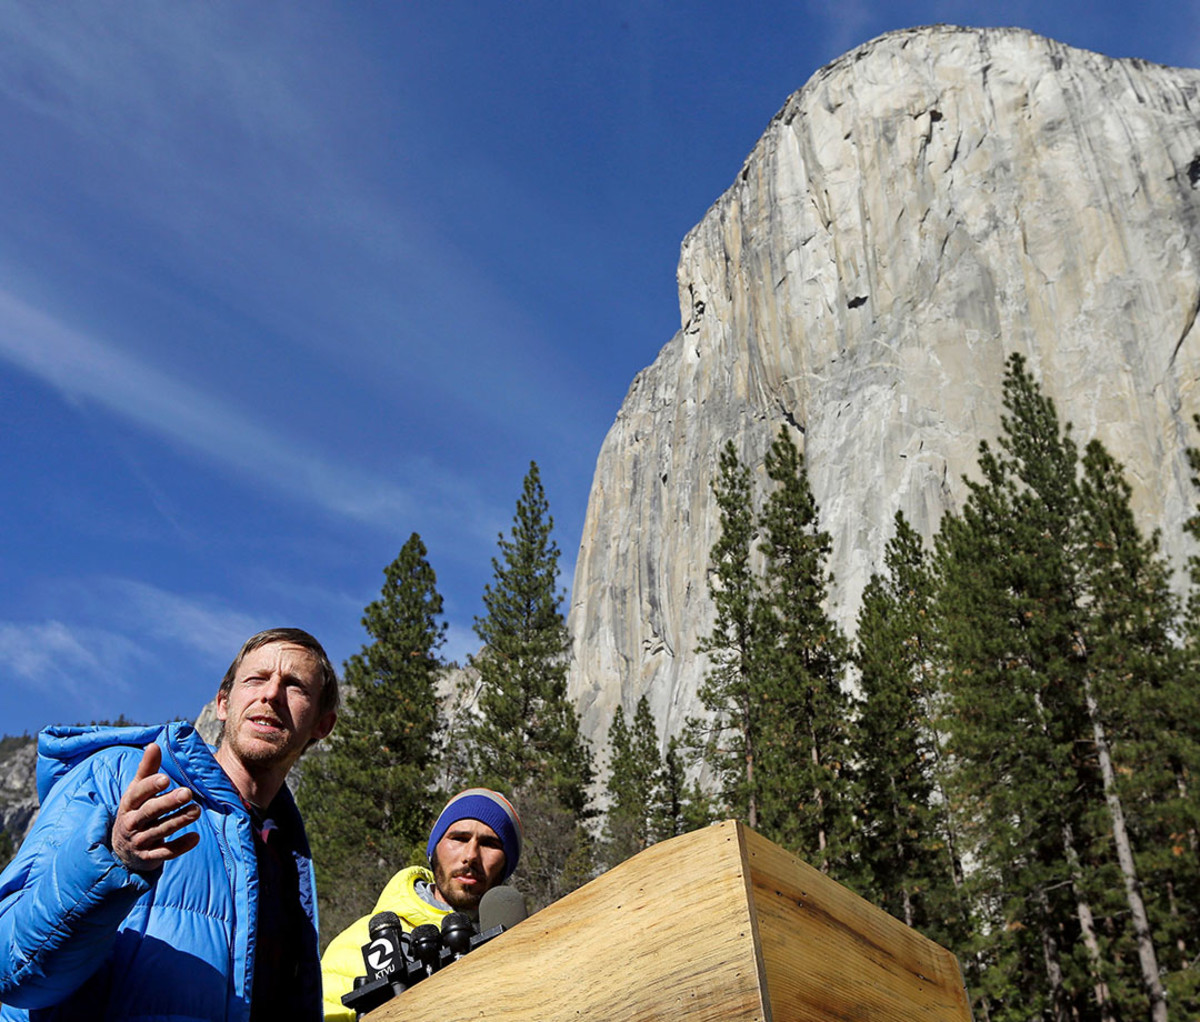 Tommy Caldwell and Kevin Jorgeson beside El Capitan in Yosemite National Park